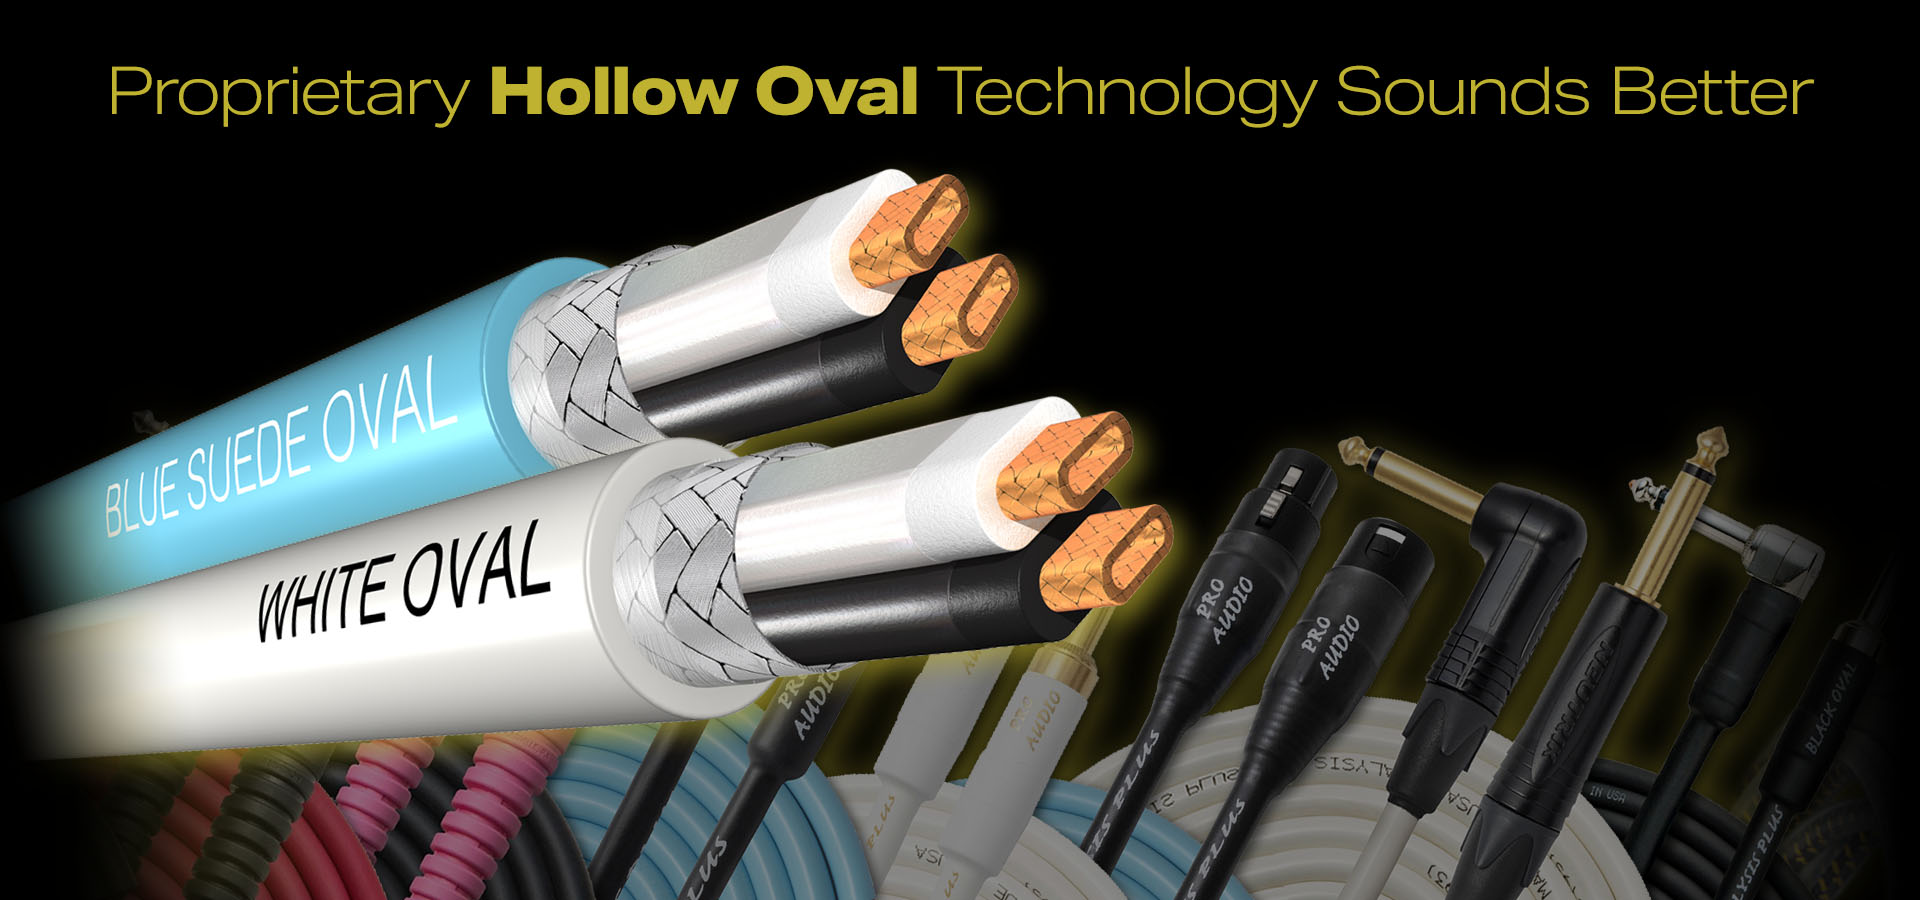 Hollow Oval Technology